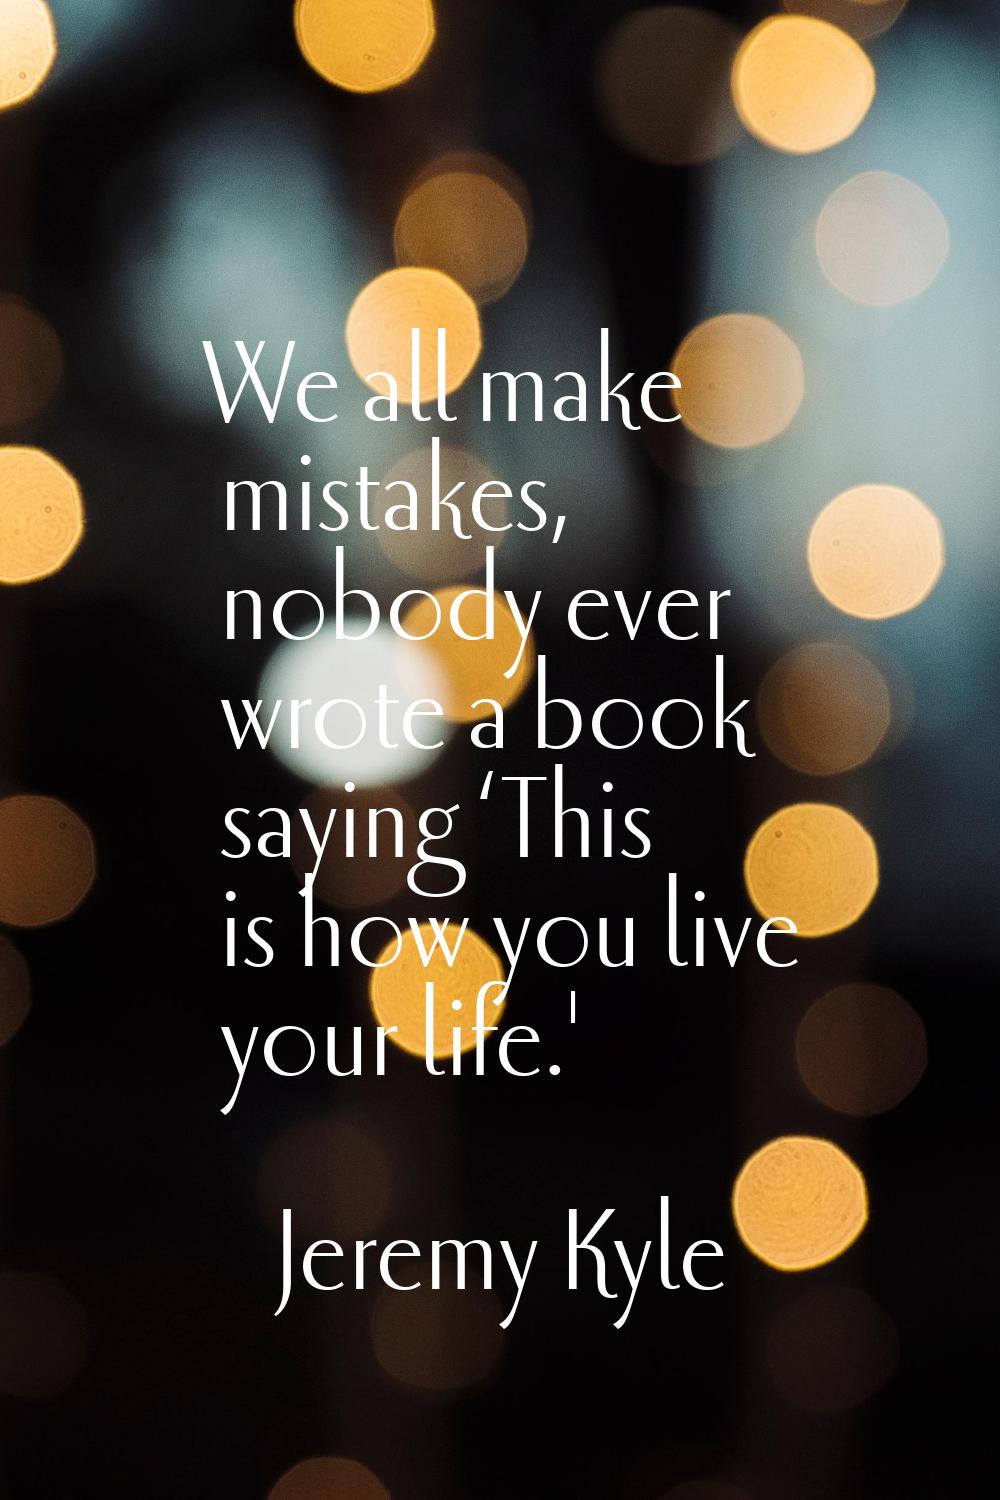 We all make mistakes, nobody ever wrote a book saying ‘This is how you live your life.'